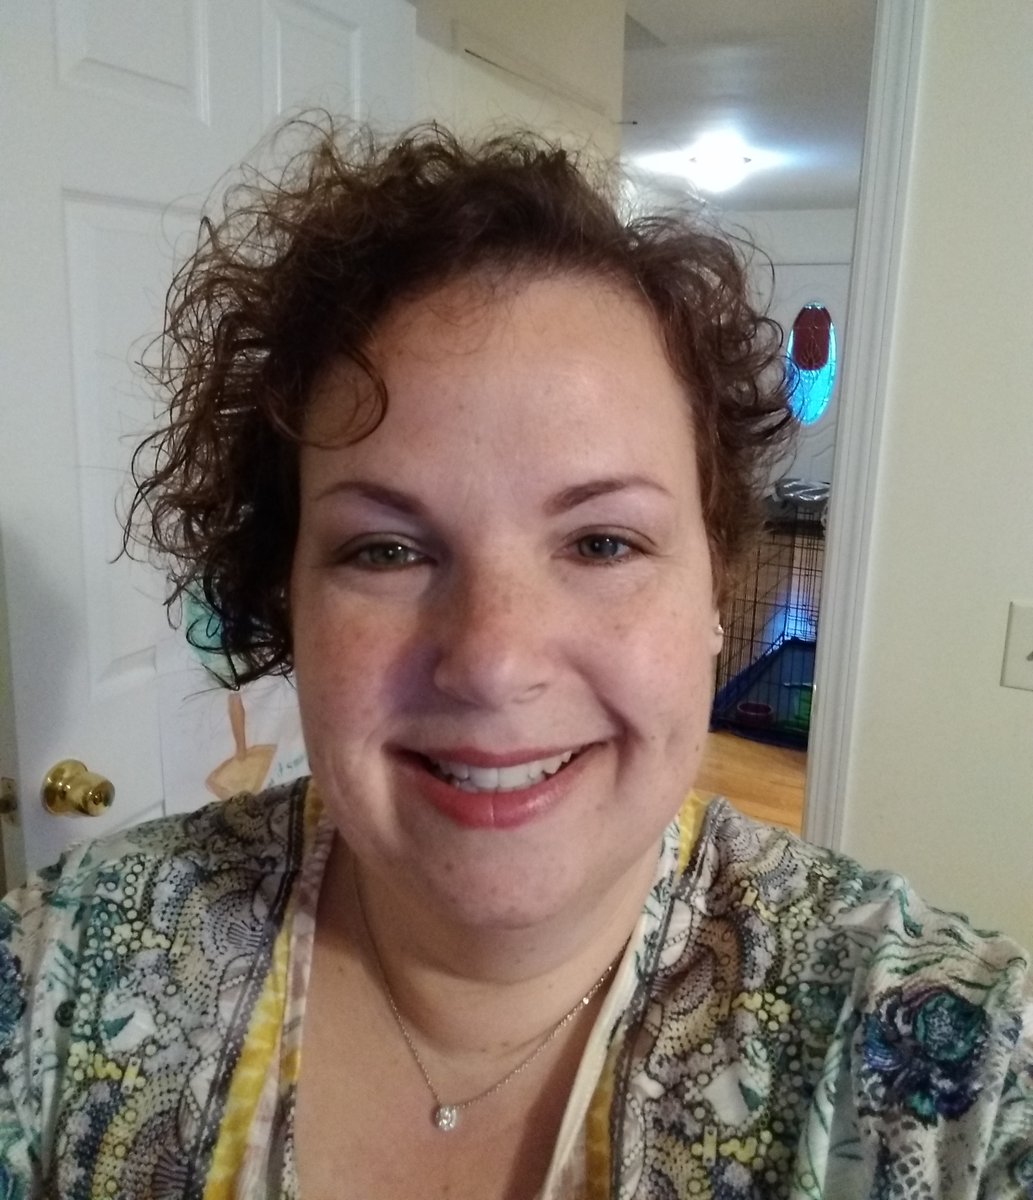 Meet Jenny Kellerman, Job Developer in Vocational Services. Jenny began working here in 1997 as a DSP at the Hauppauge Day Program, during which time she also joined the Rec program where she became a supervisor for several years. #TeamACLD

Read more - https://t.co/Ug4zobOR8t https://t.co/7eJpmWrXxe